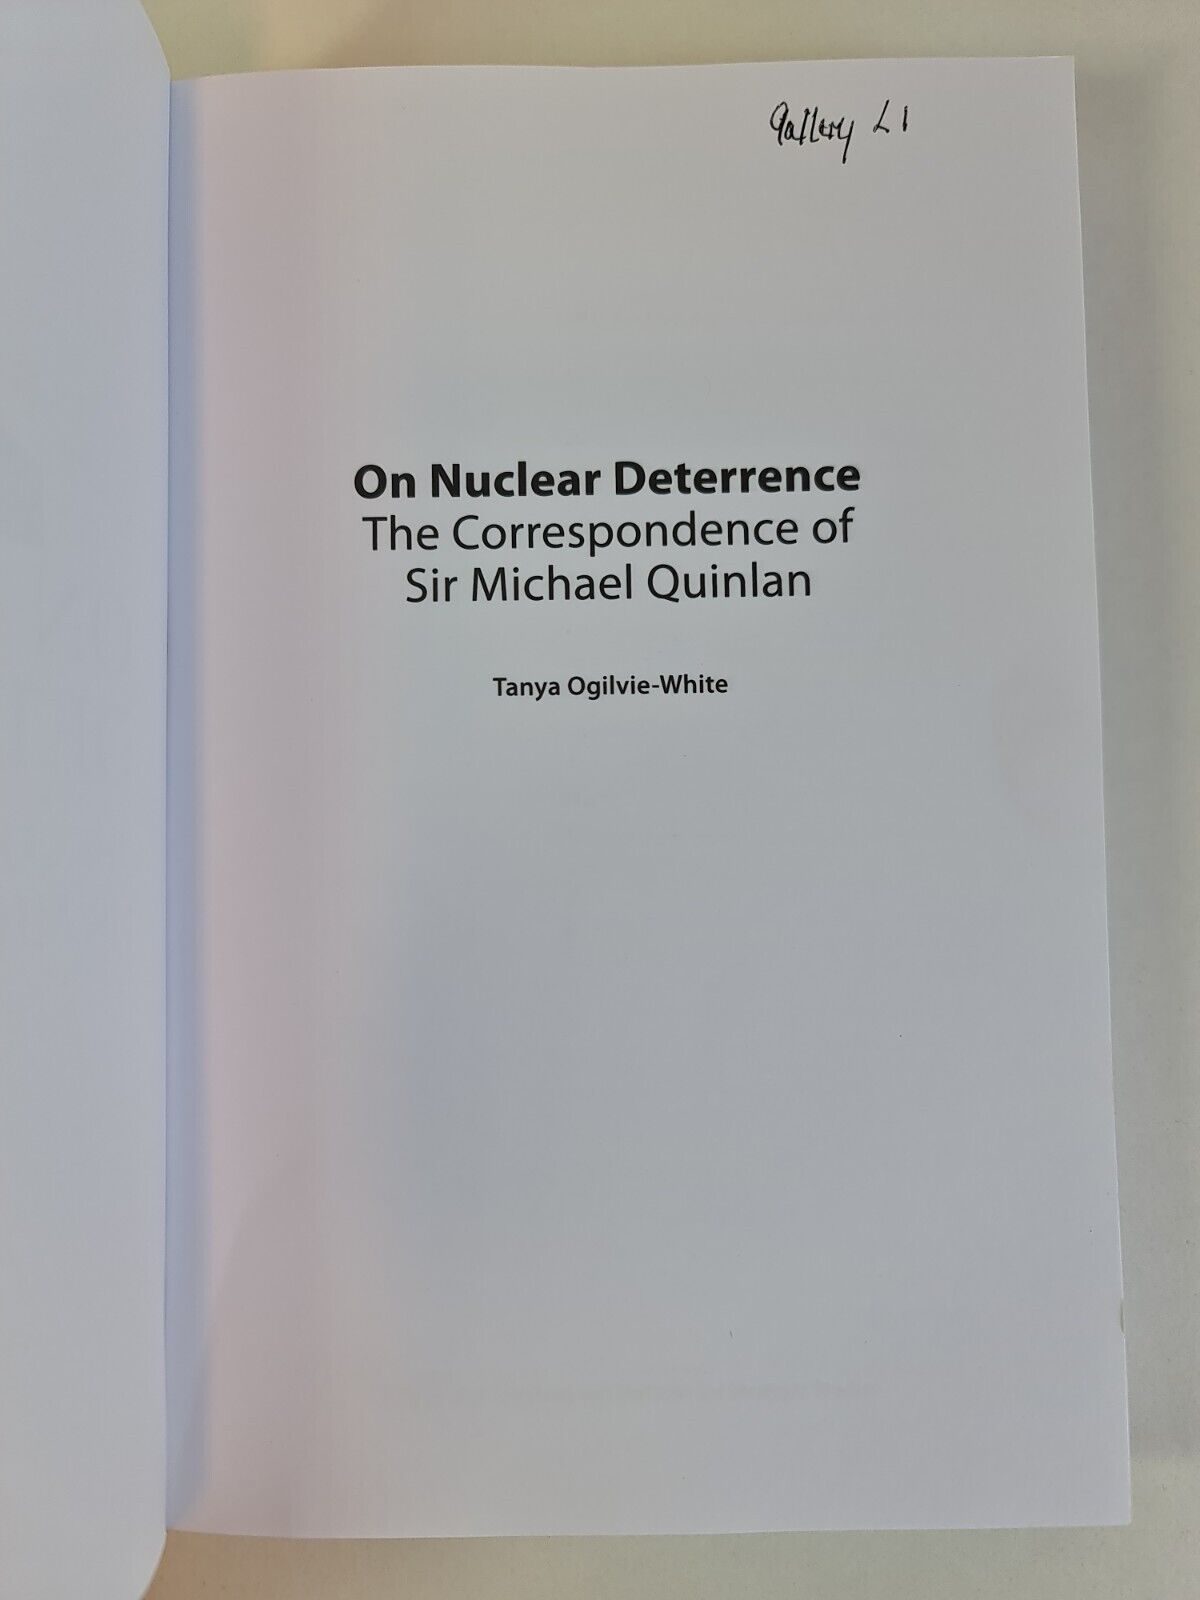 On Nuclear Deterrence: The Correspondence of Sir Michael Quinlan (2011)